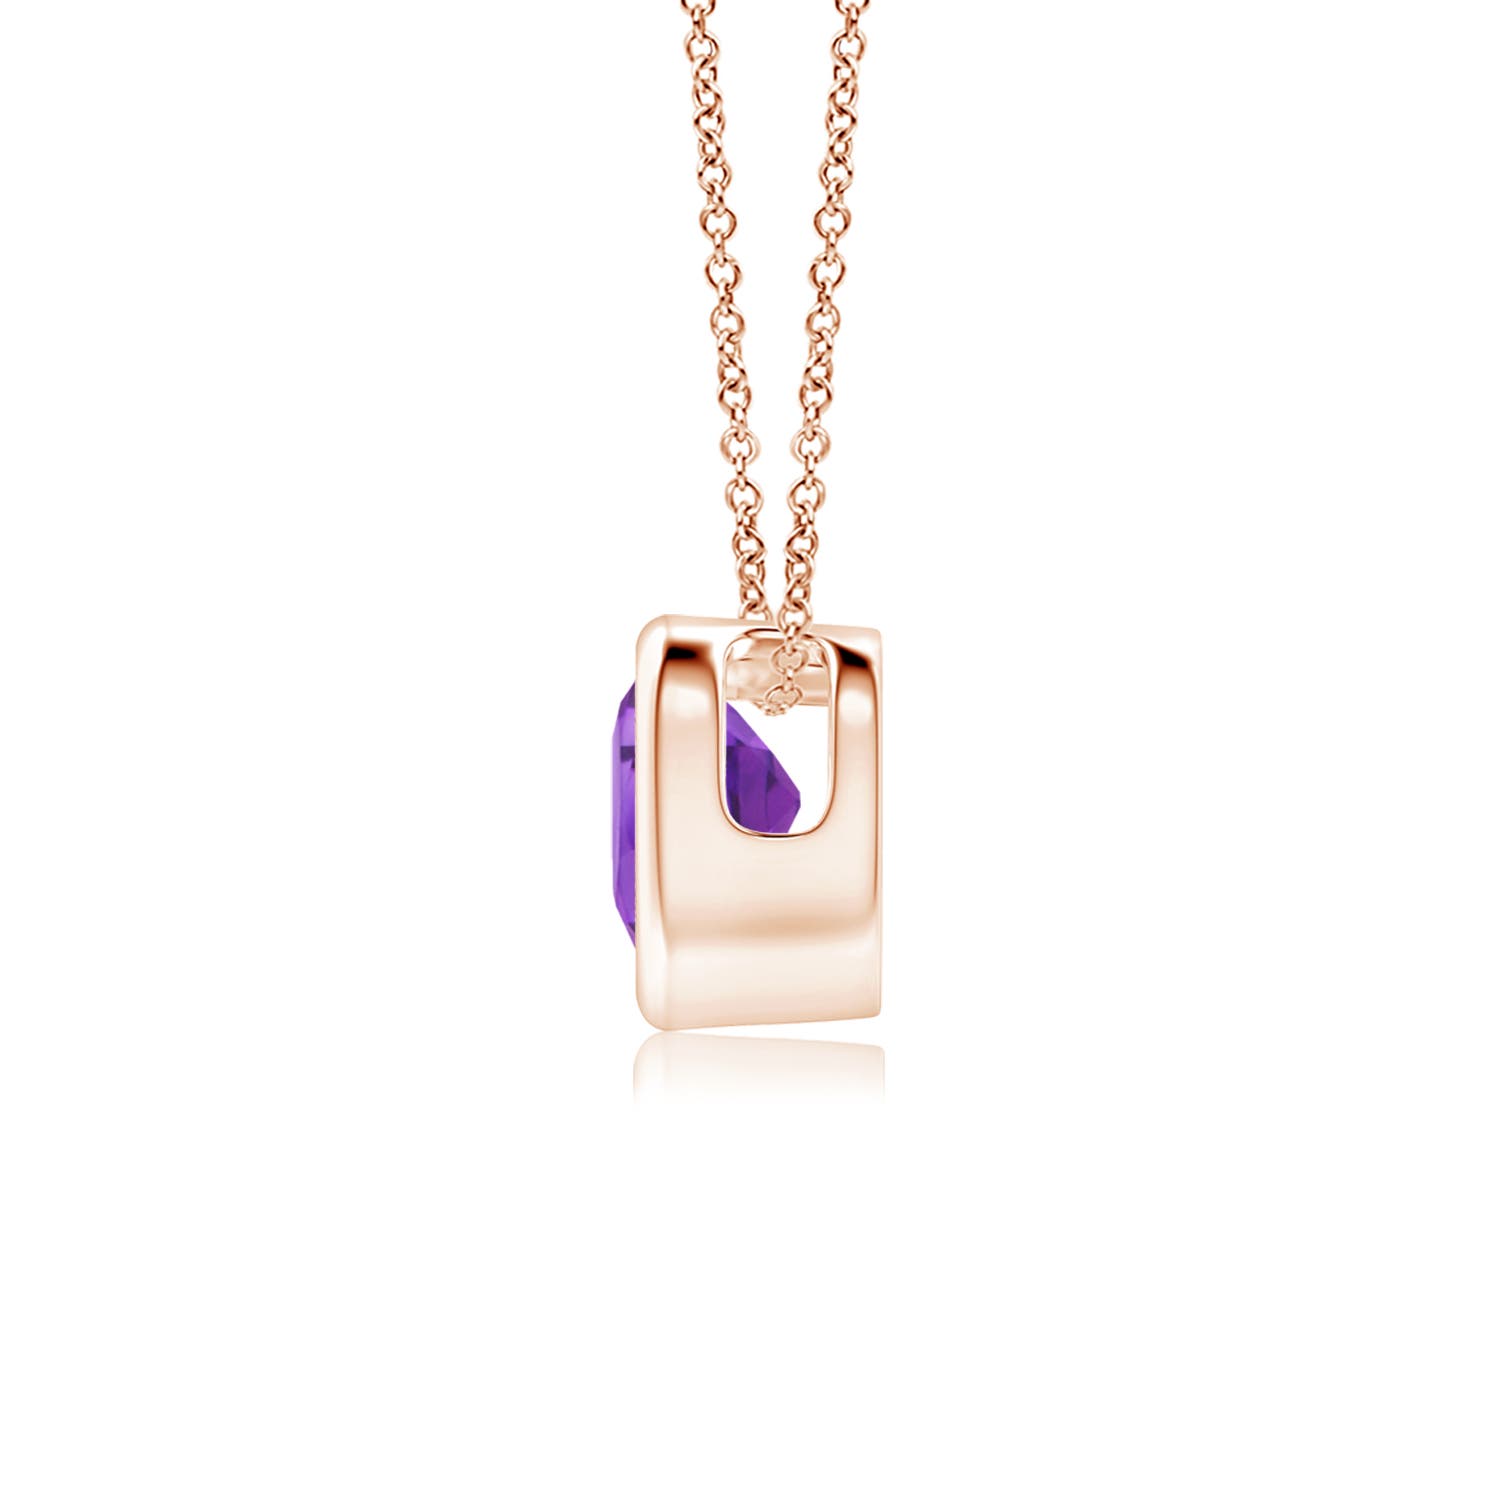 AA - Amethyst / 0.2 CT / 14 KT Rose Gold